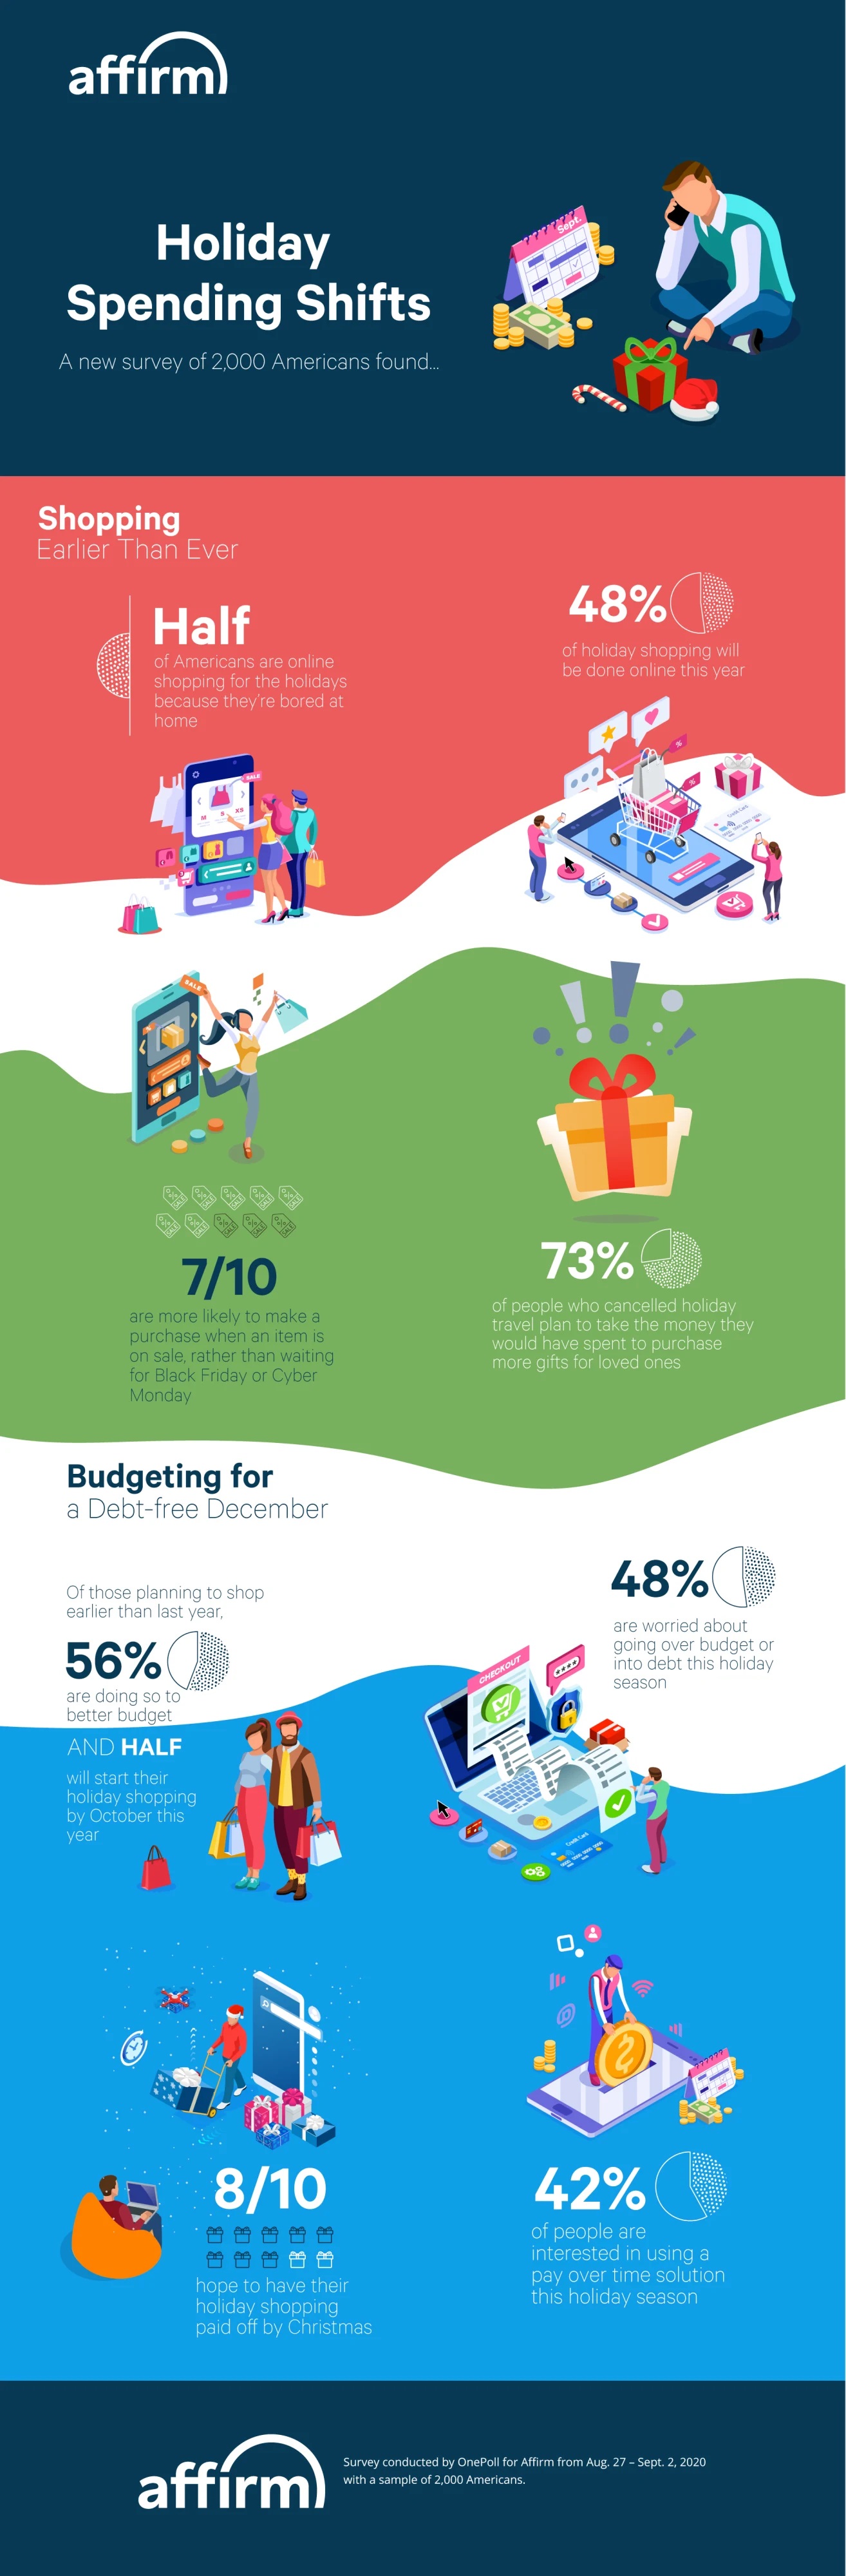 Affirm_Holiday_Survey_Infographic